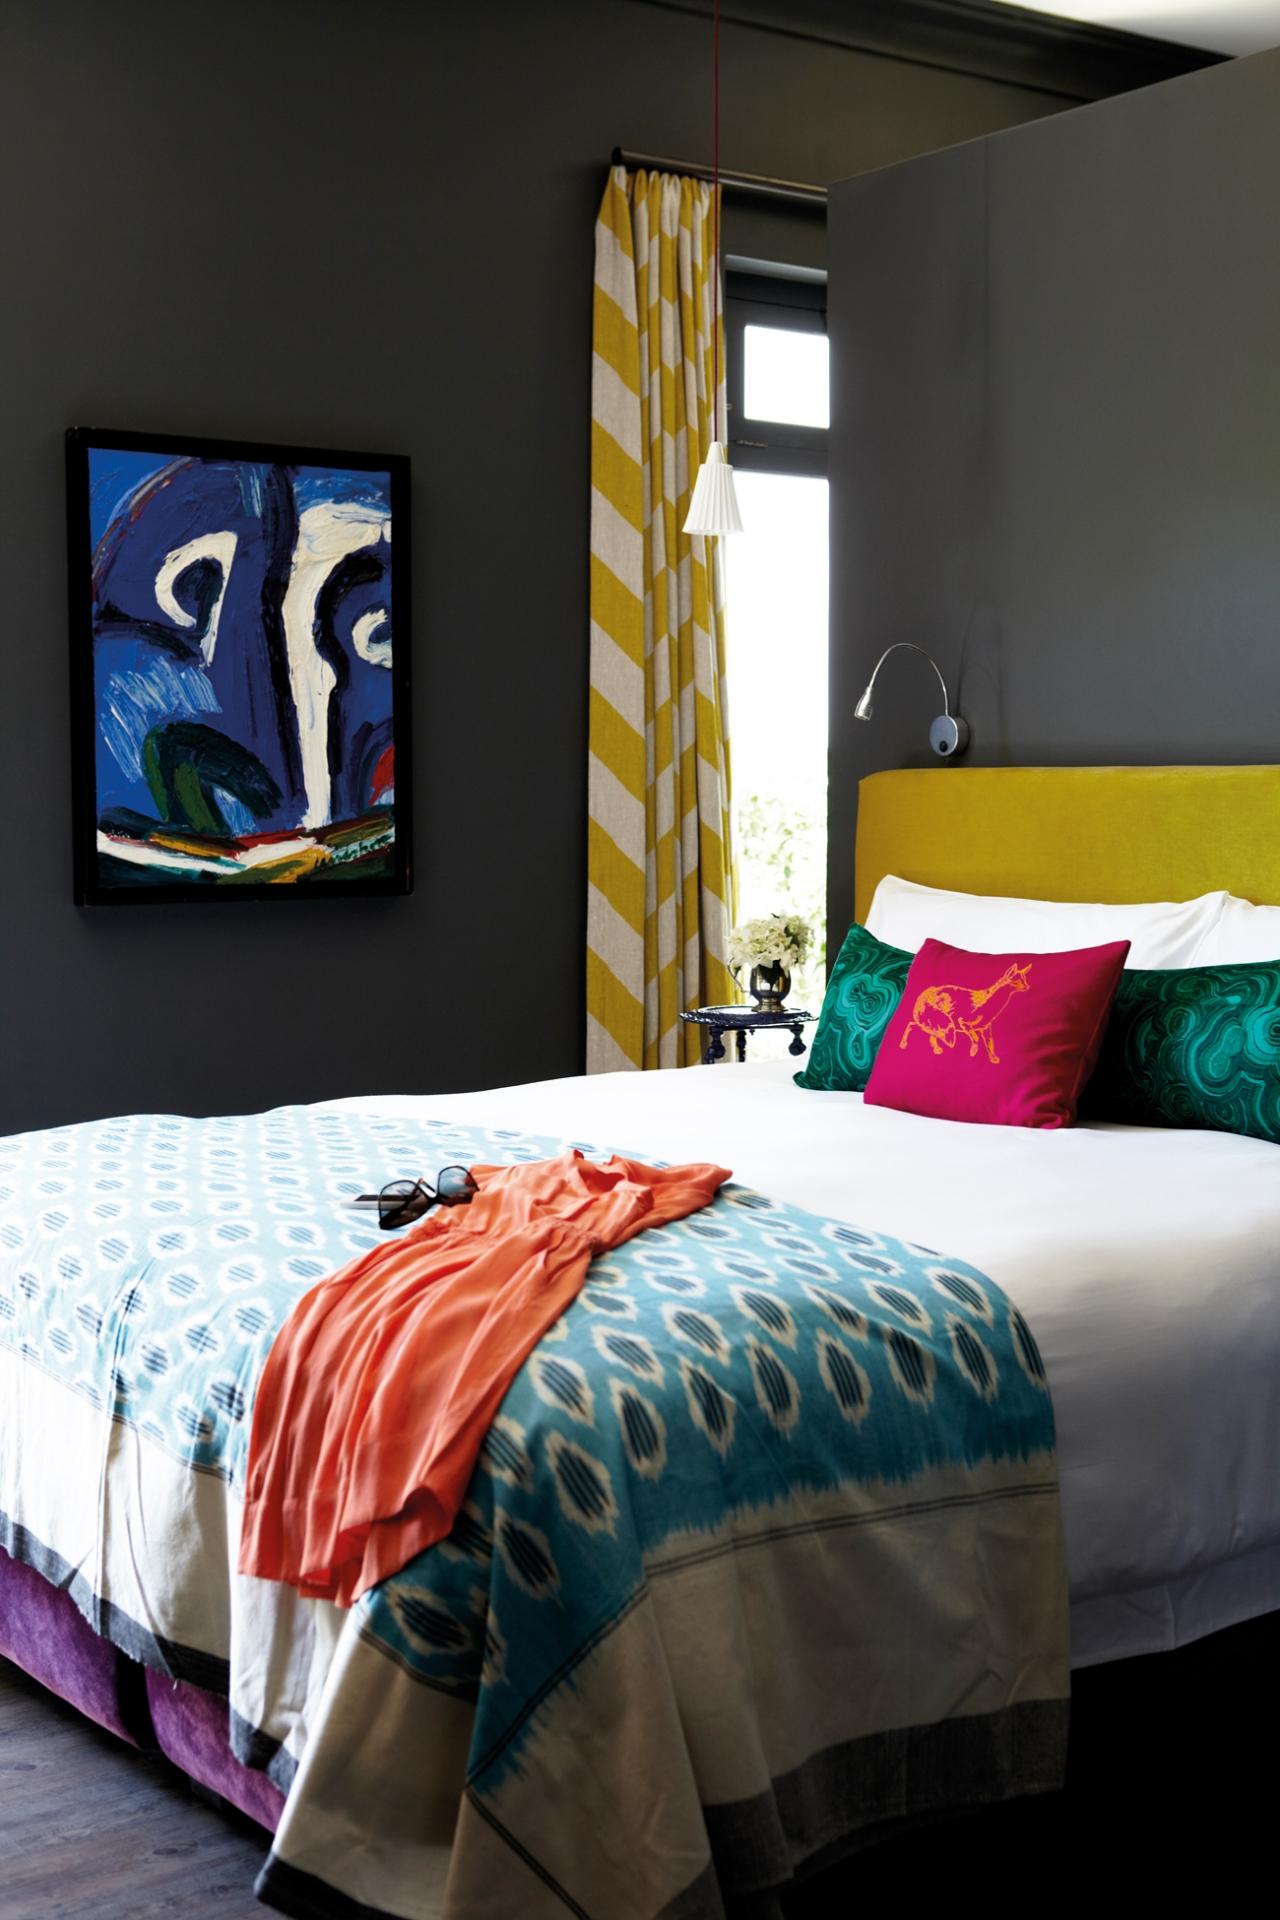 Cape Escape: A South African Respite Brimming With Art